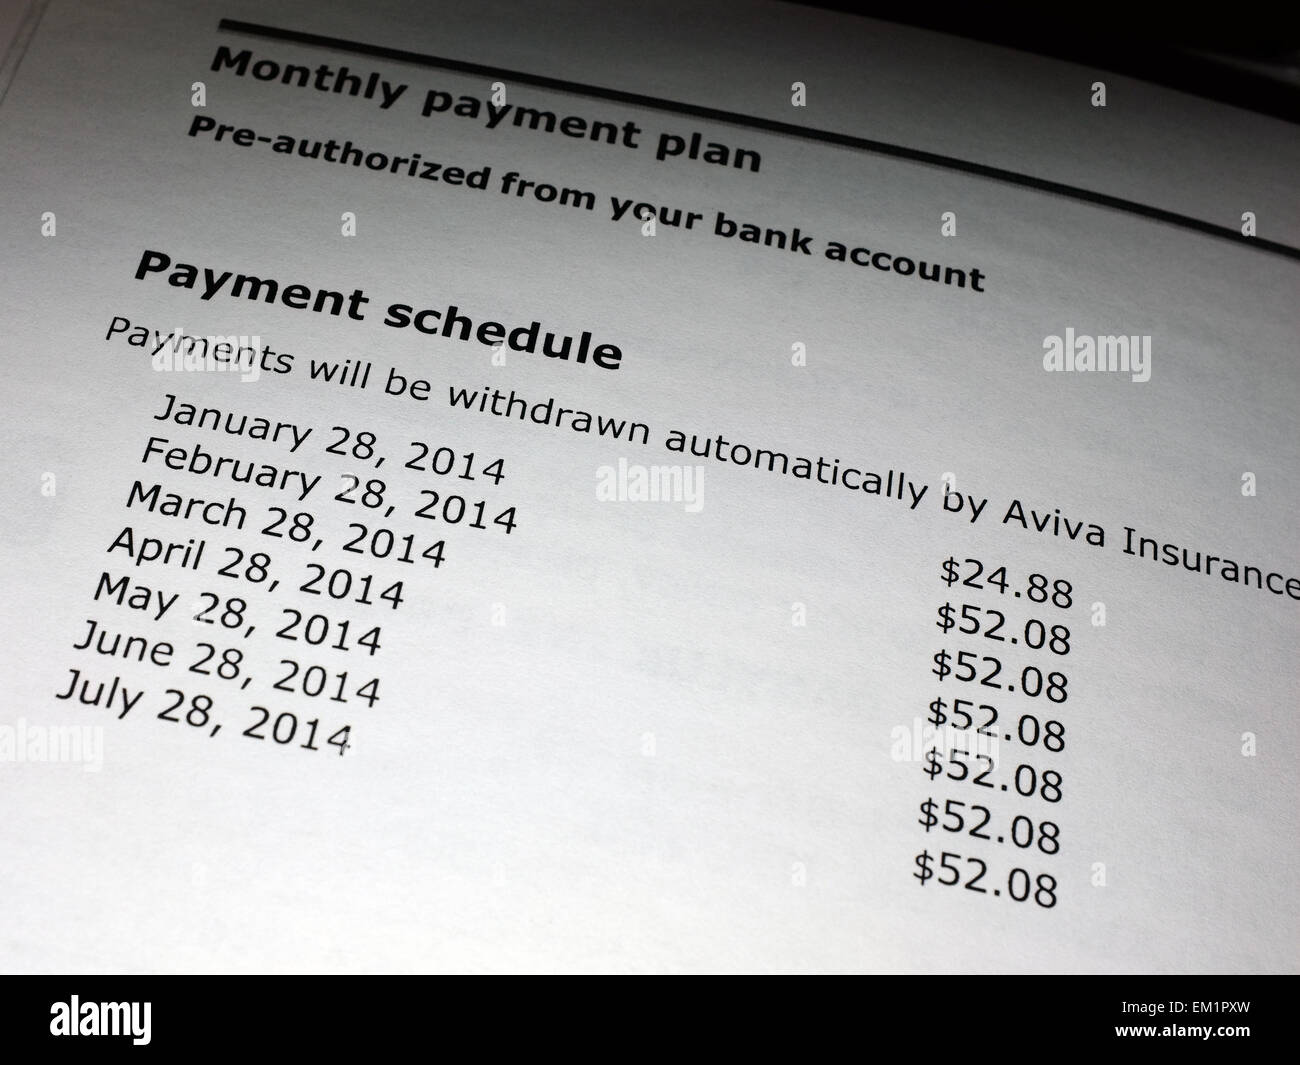 a-monthly-payment-plan-payment-schedule-stock-photo-alamy